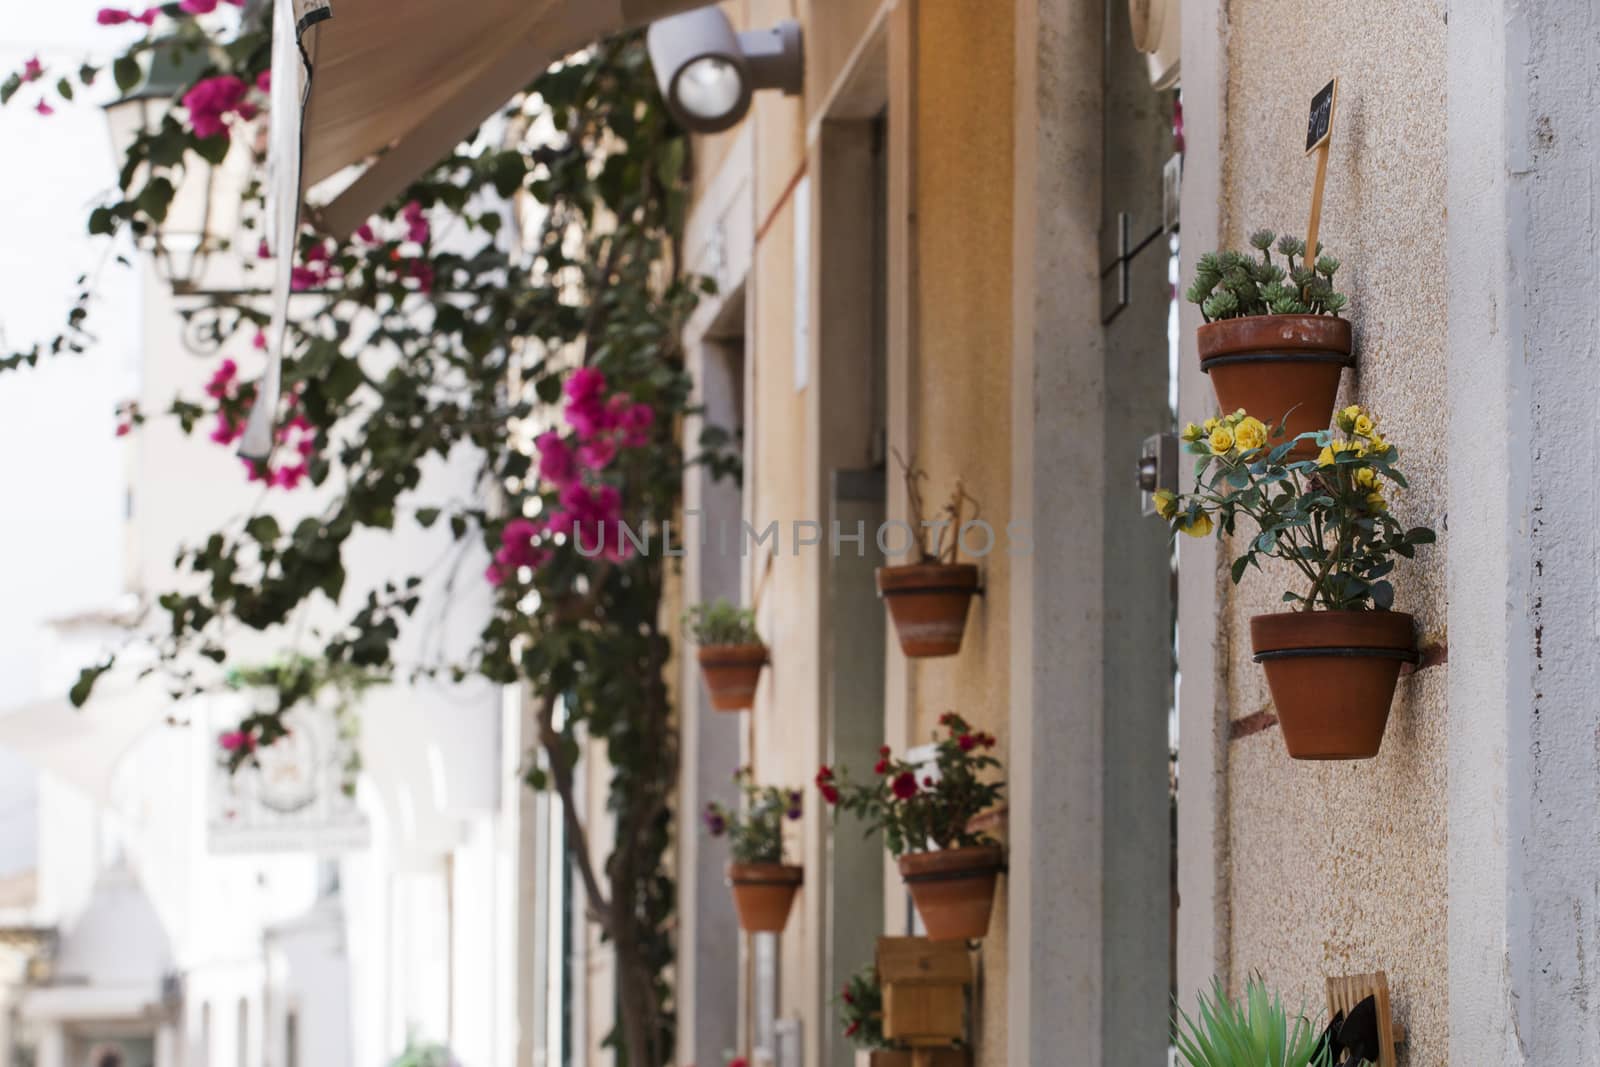 Close up view of beautiful decorative flower vases on the street.